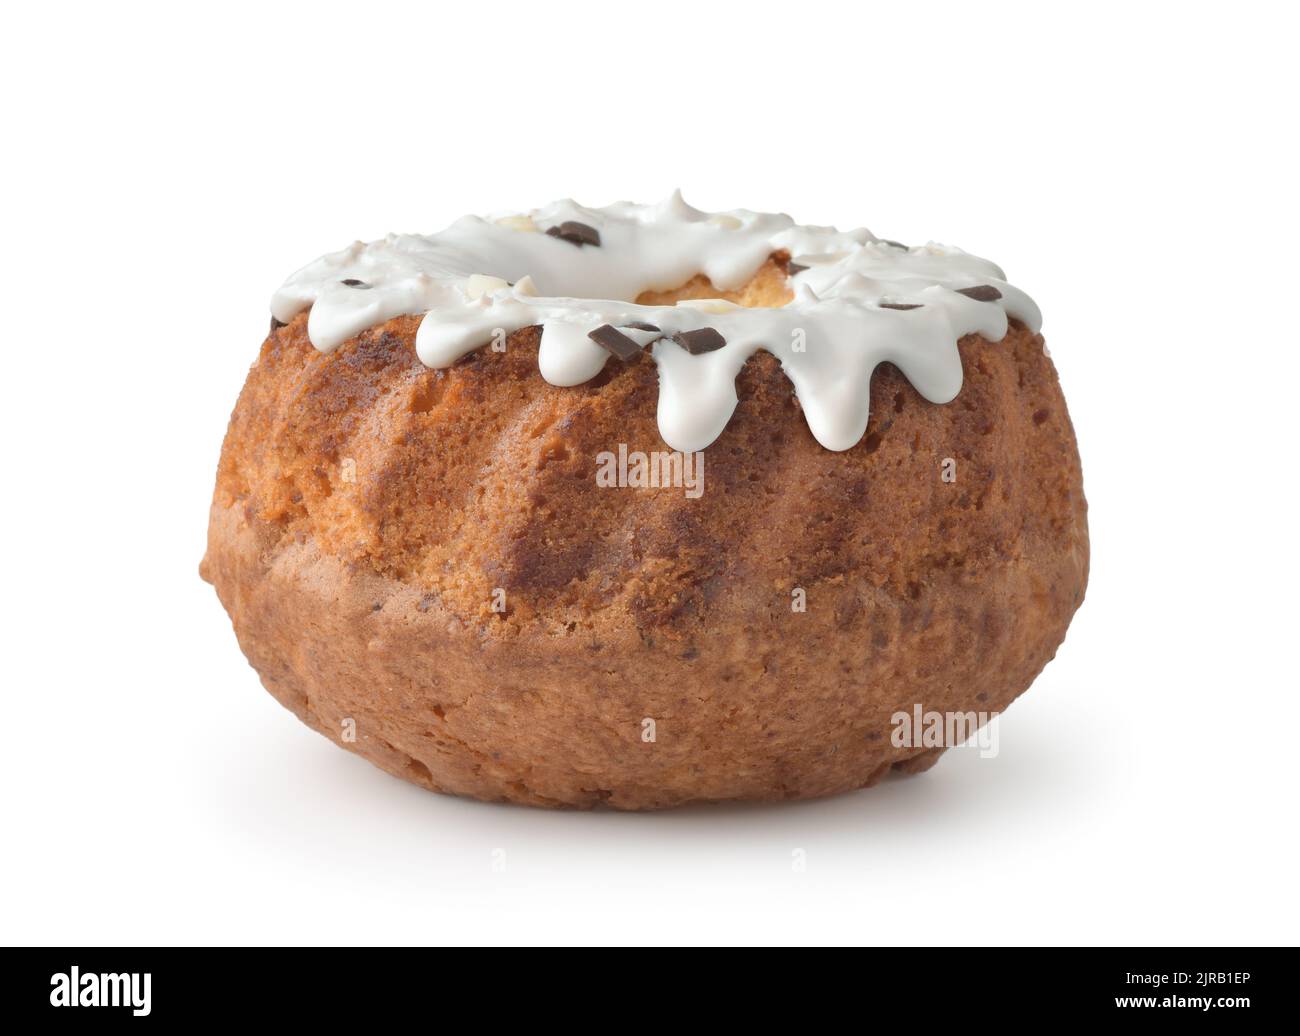 Homemade pumpkin bundt cake with powdered sugar glaze and chocolate chips isolated on white Stock Photo